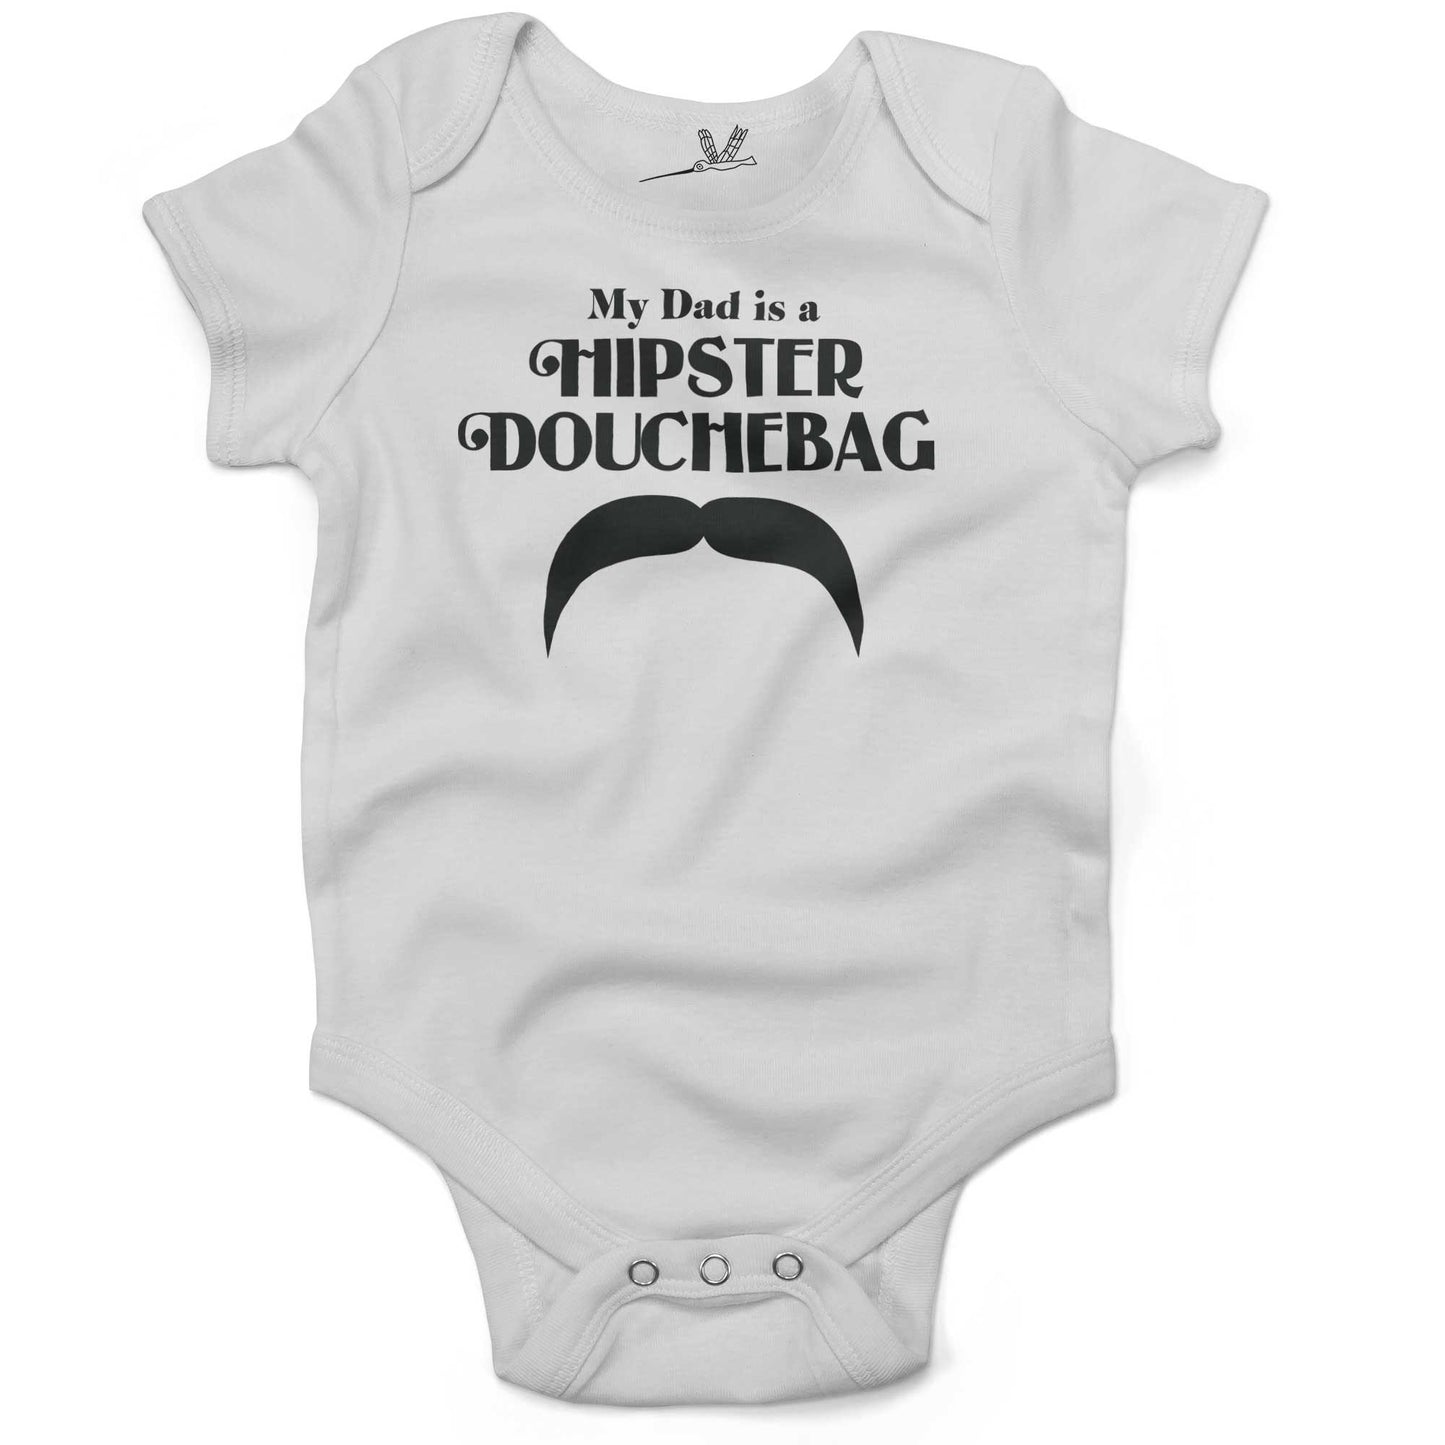 My Dad Is A Hipster DouchBag Infant Bodysuit or Raglan Baby Tee-White-3-6 months